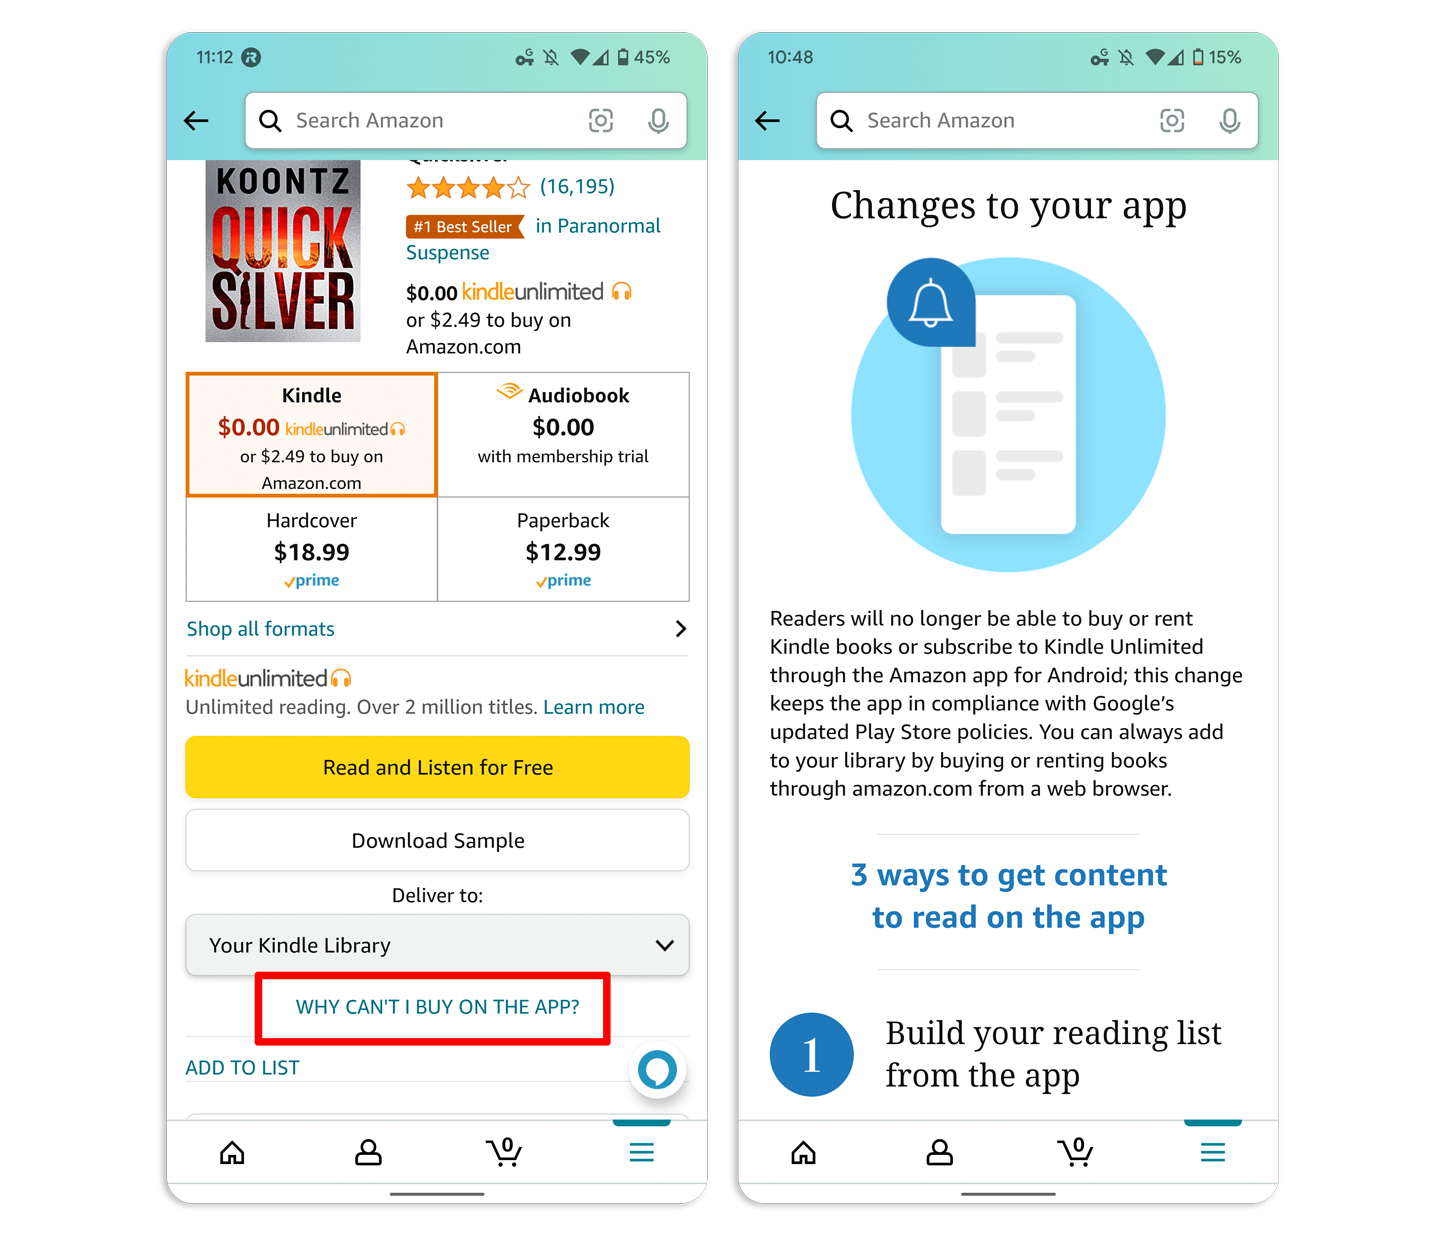 Android users can't buy titles on Audible or B&N NOOK - Protocol